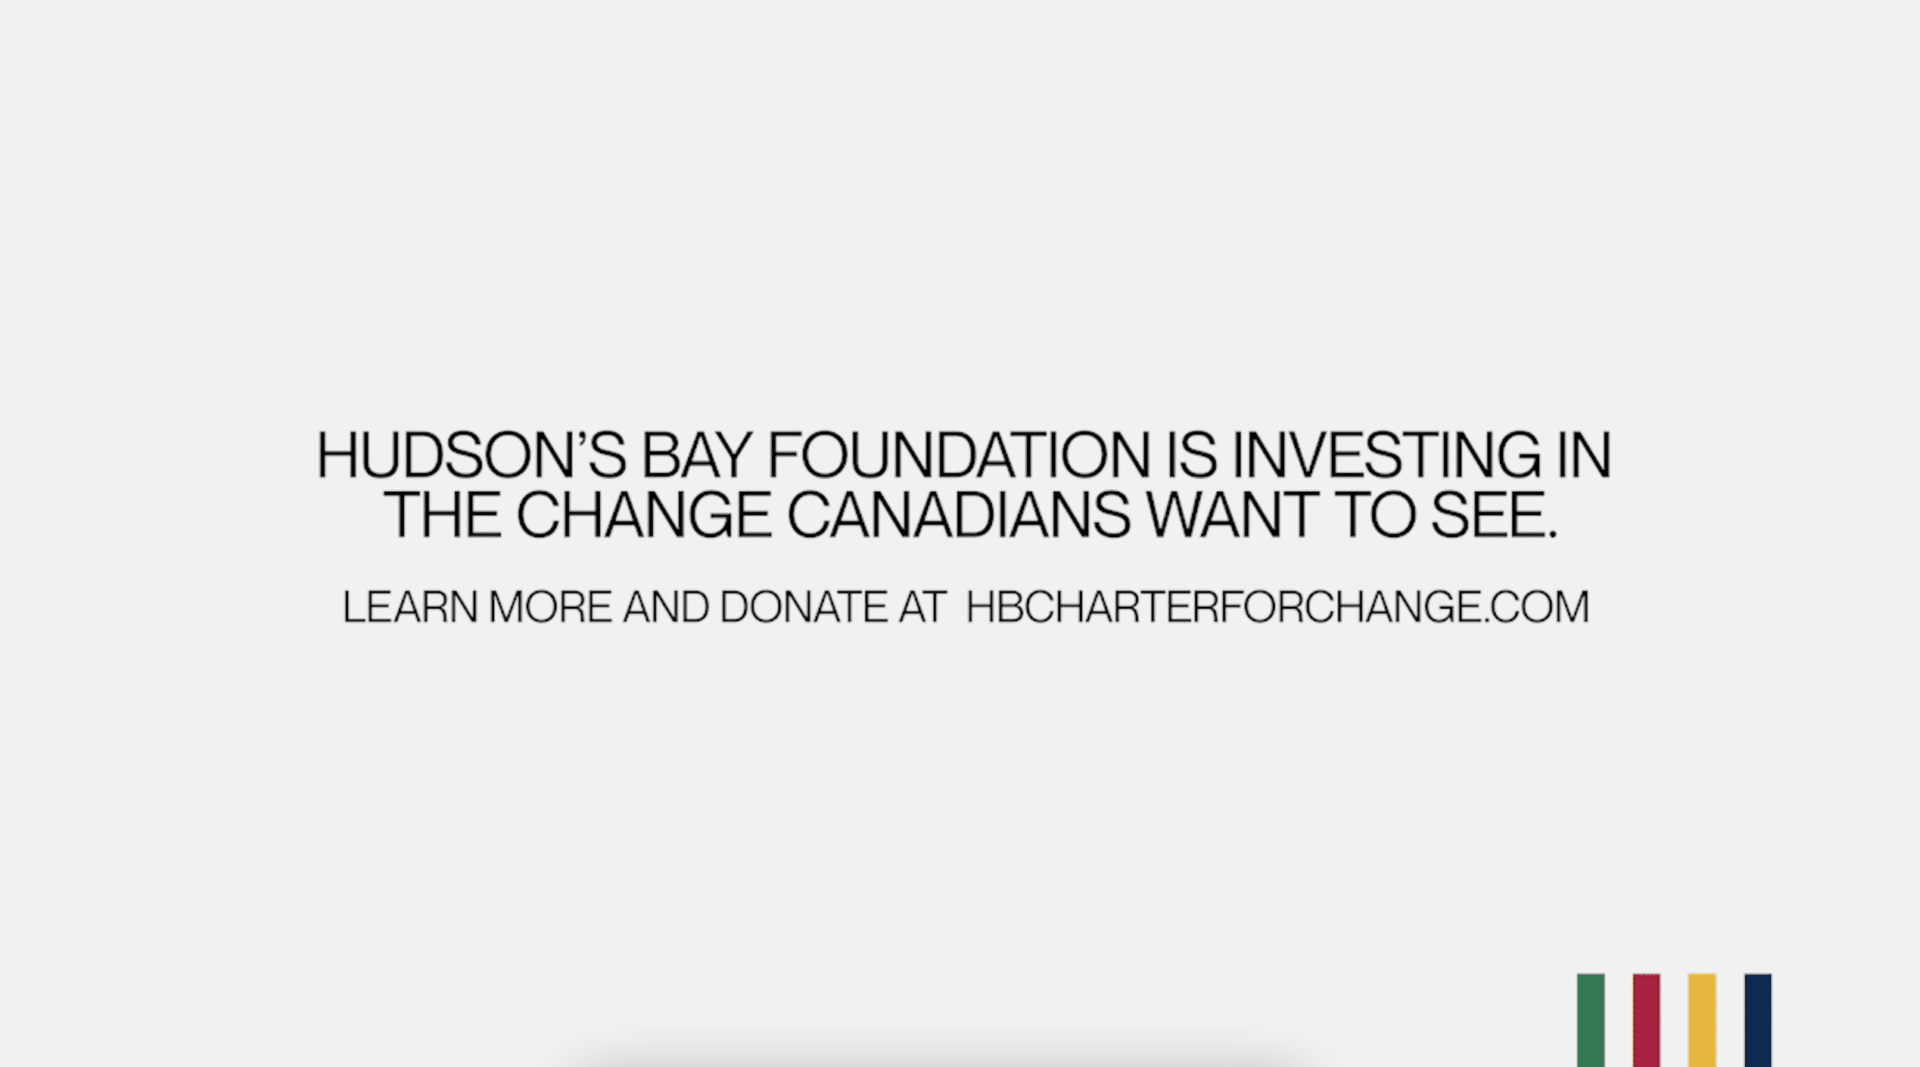 Beige background with the Hudson's Bay colours, with text that reads, "Hudson's Bay Foundation is investing in the change Canadians want to see. Learn more at hbcharterforchange.com